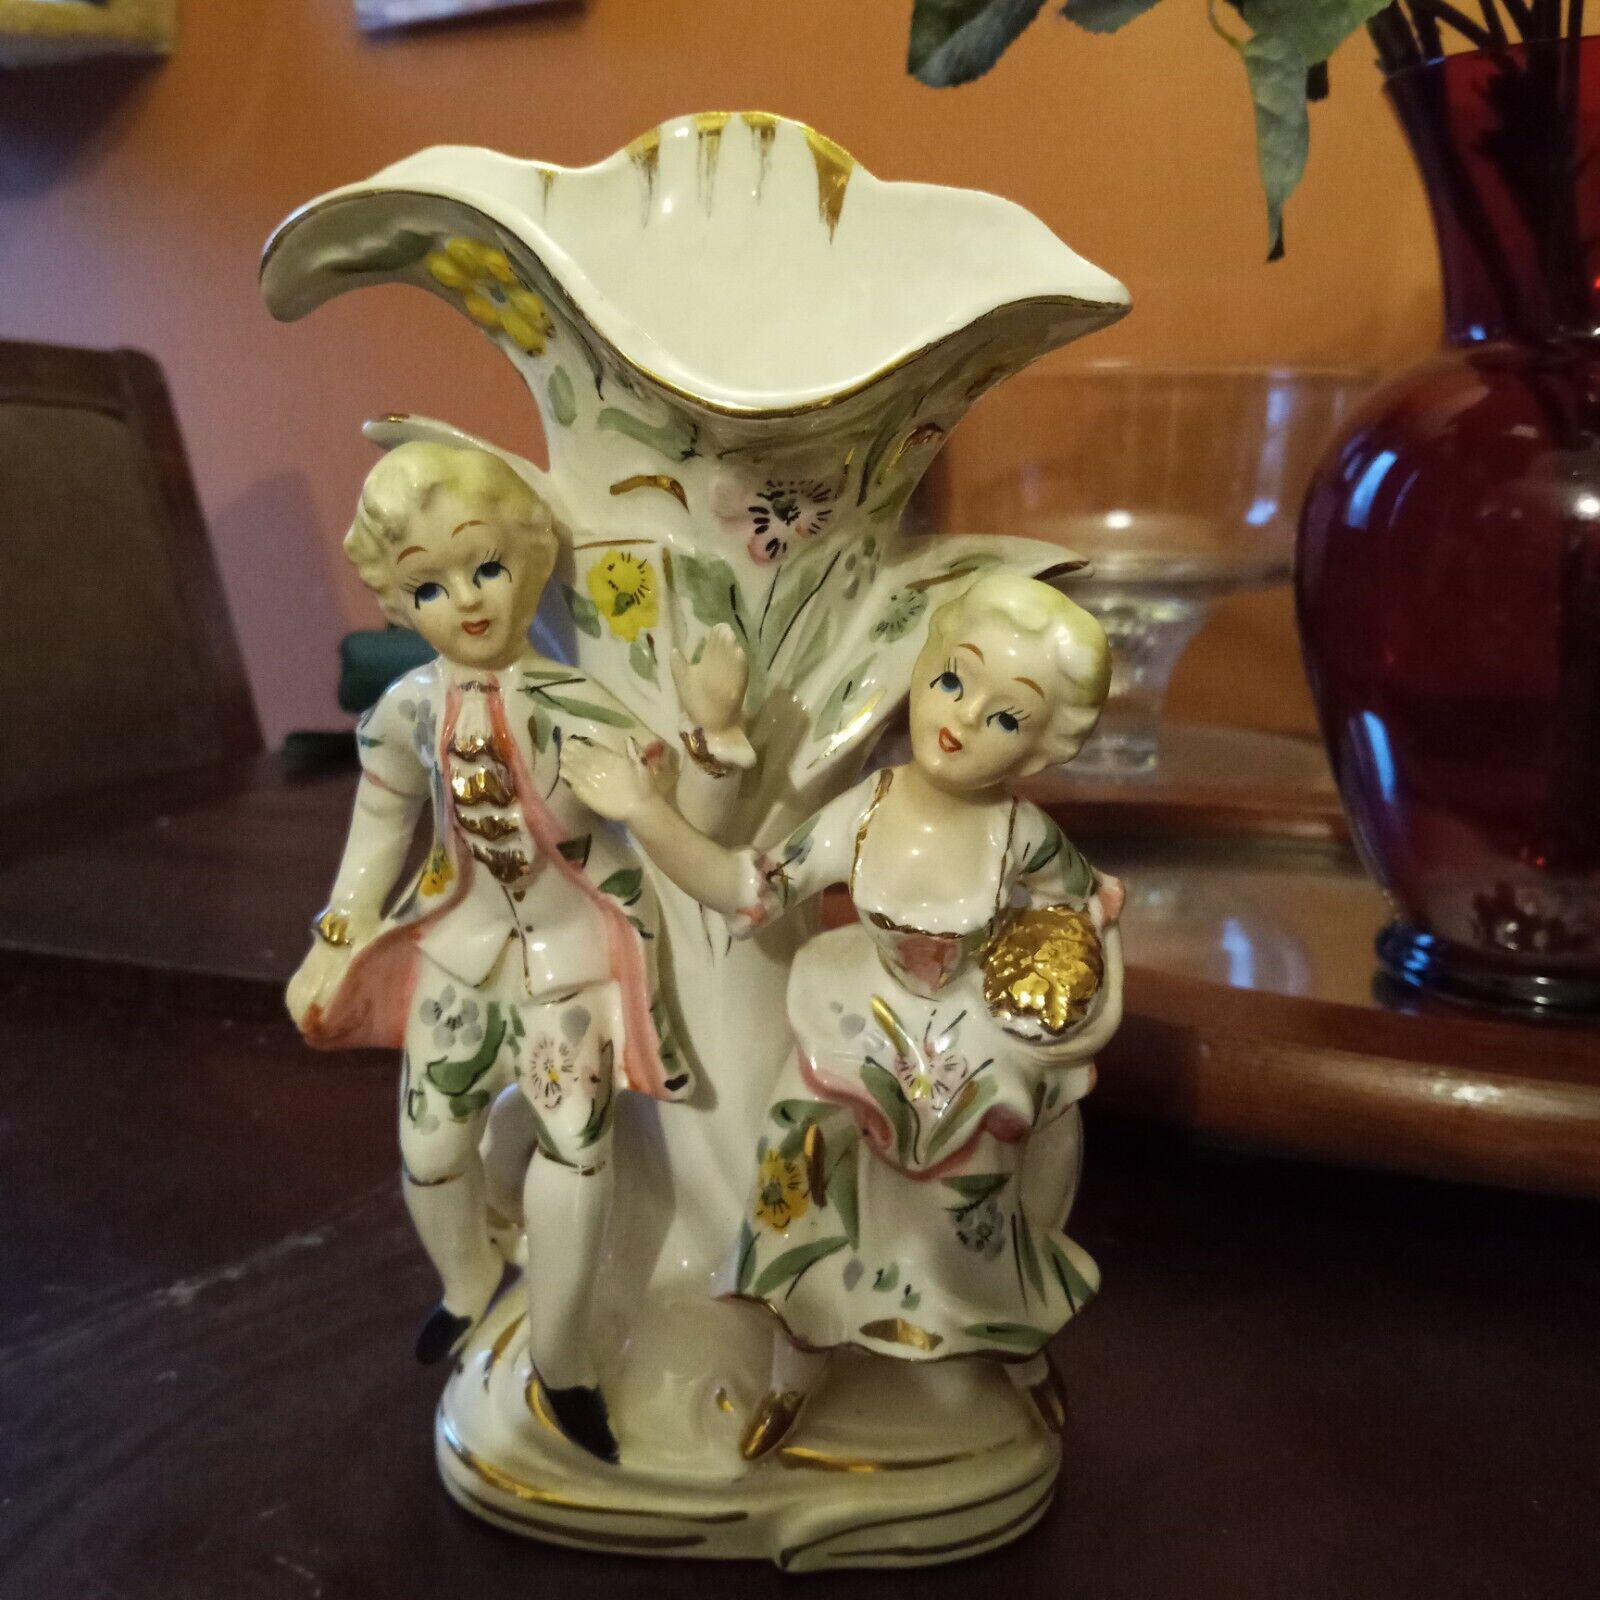 Vintage Imperial Japan Figural Vase 10in x6in X 3in 1950's Renaissance Style VG